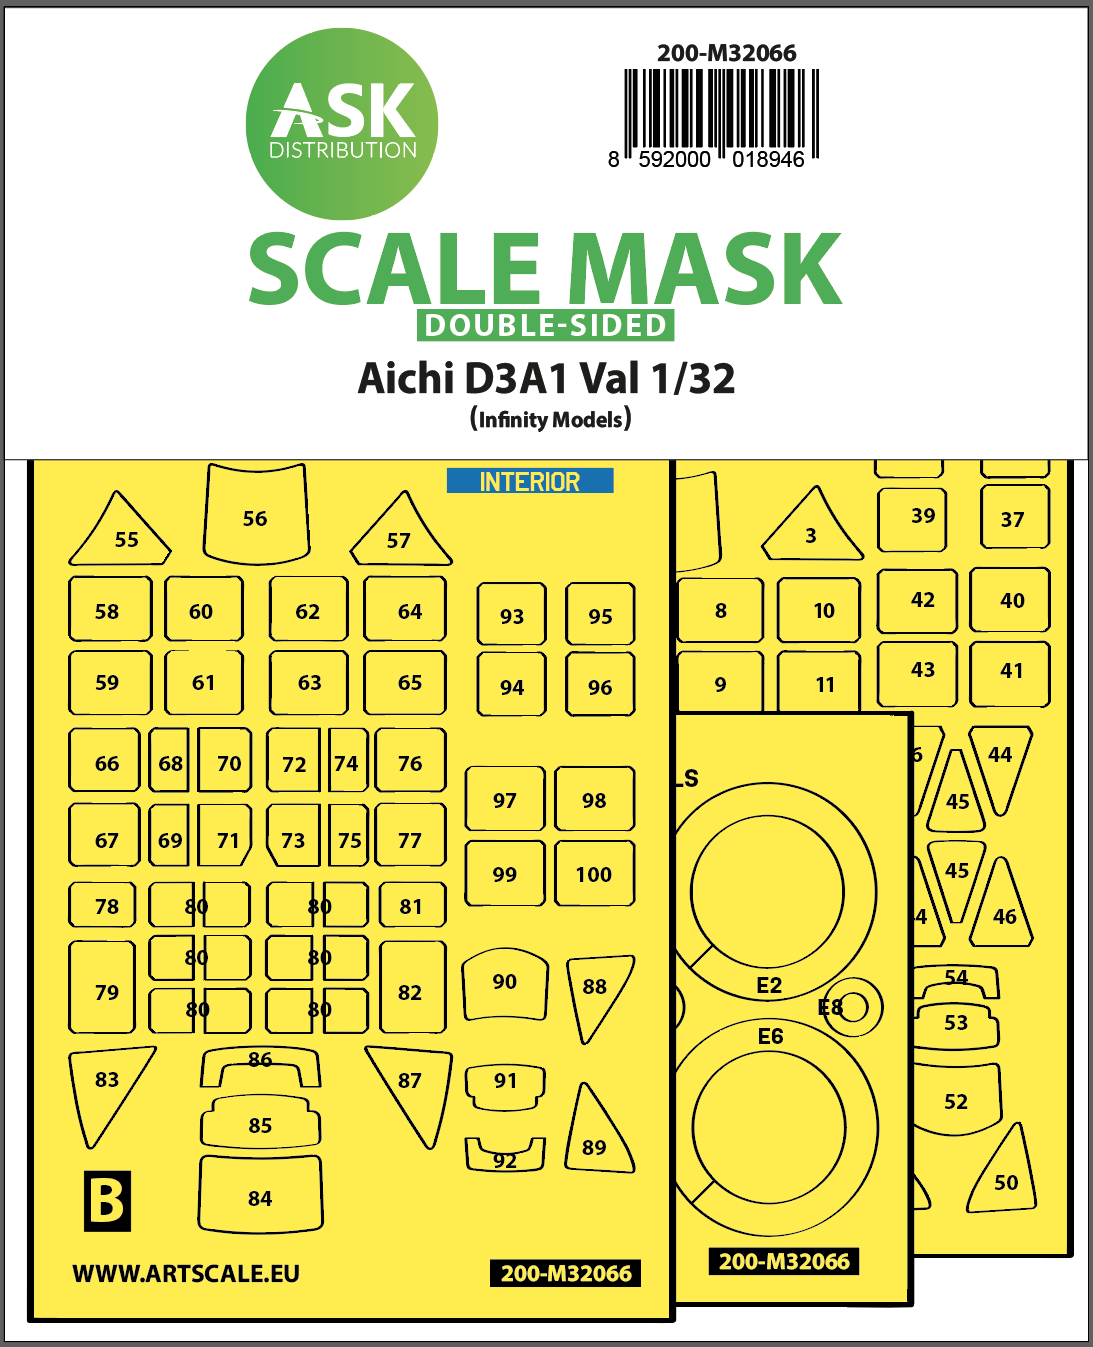 1/32 Aichi D3A1 Val double-sided express self adhesive mask for Infinity 3206